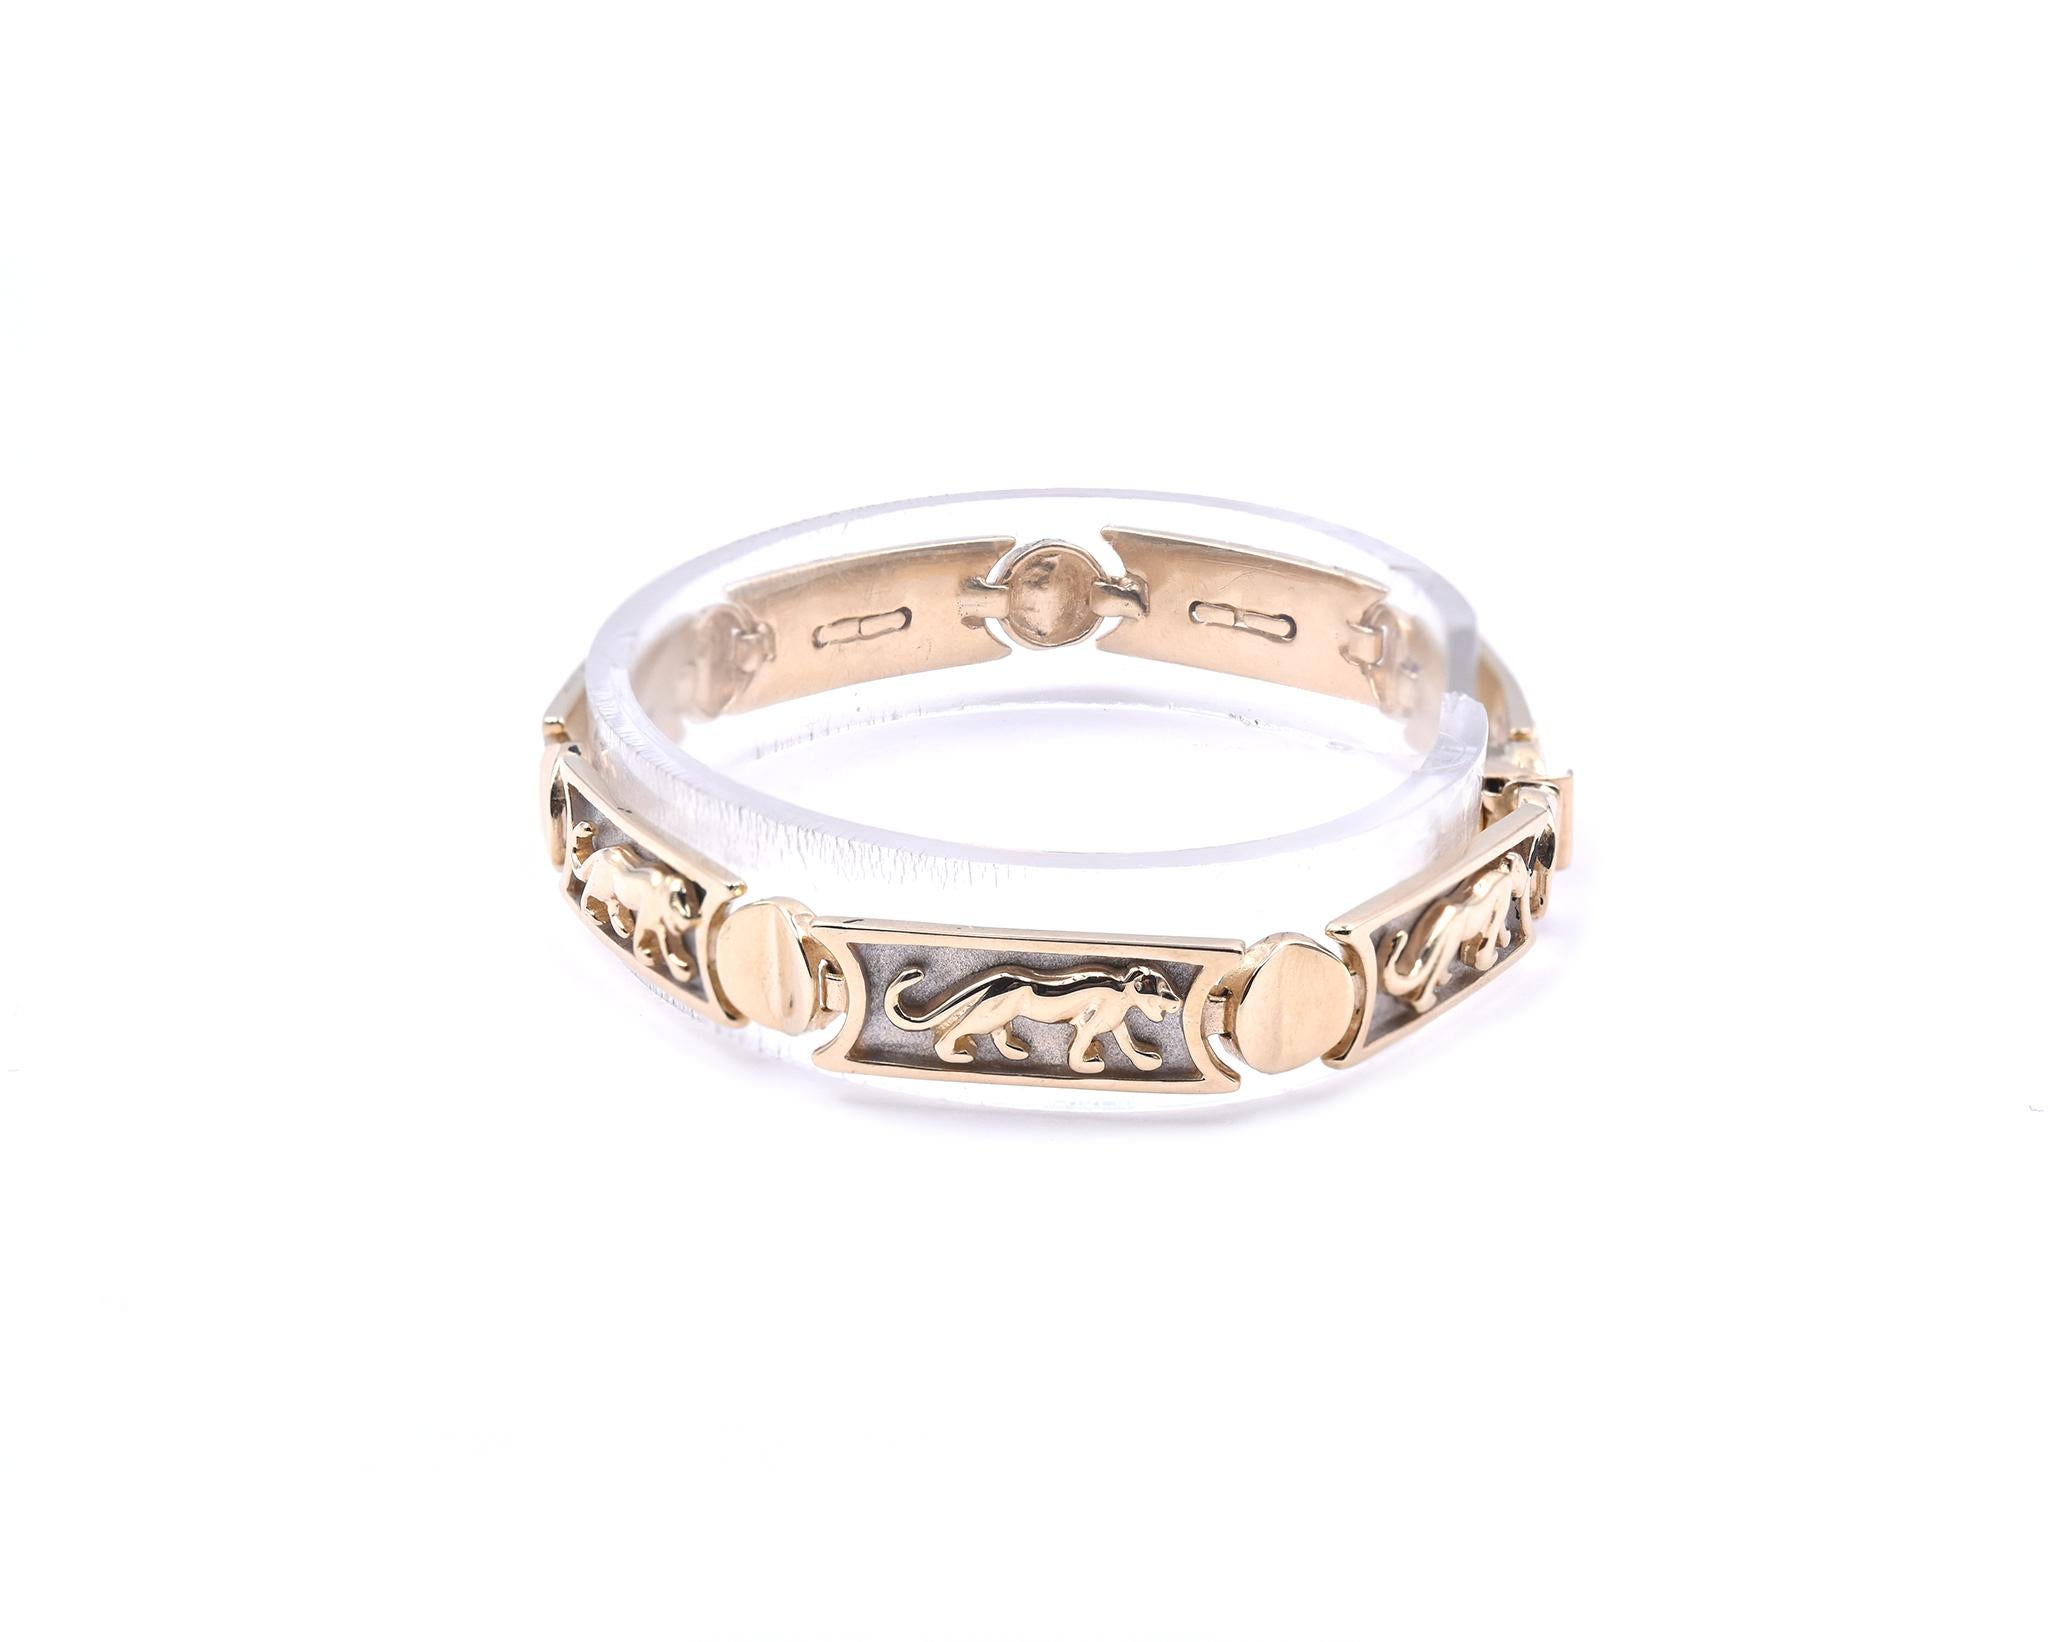 Designer: ABR
Material: 14K yellow gold 
Dimensions: bracelet measures 7.25-inches
Weight: 21.32 grams
